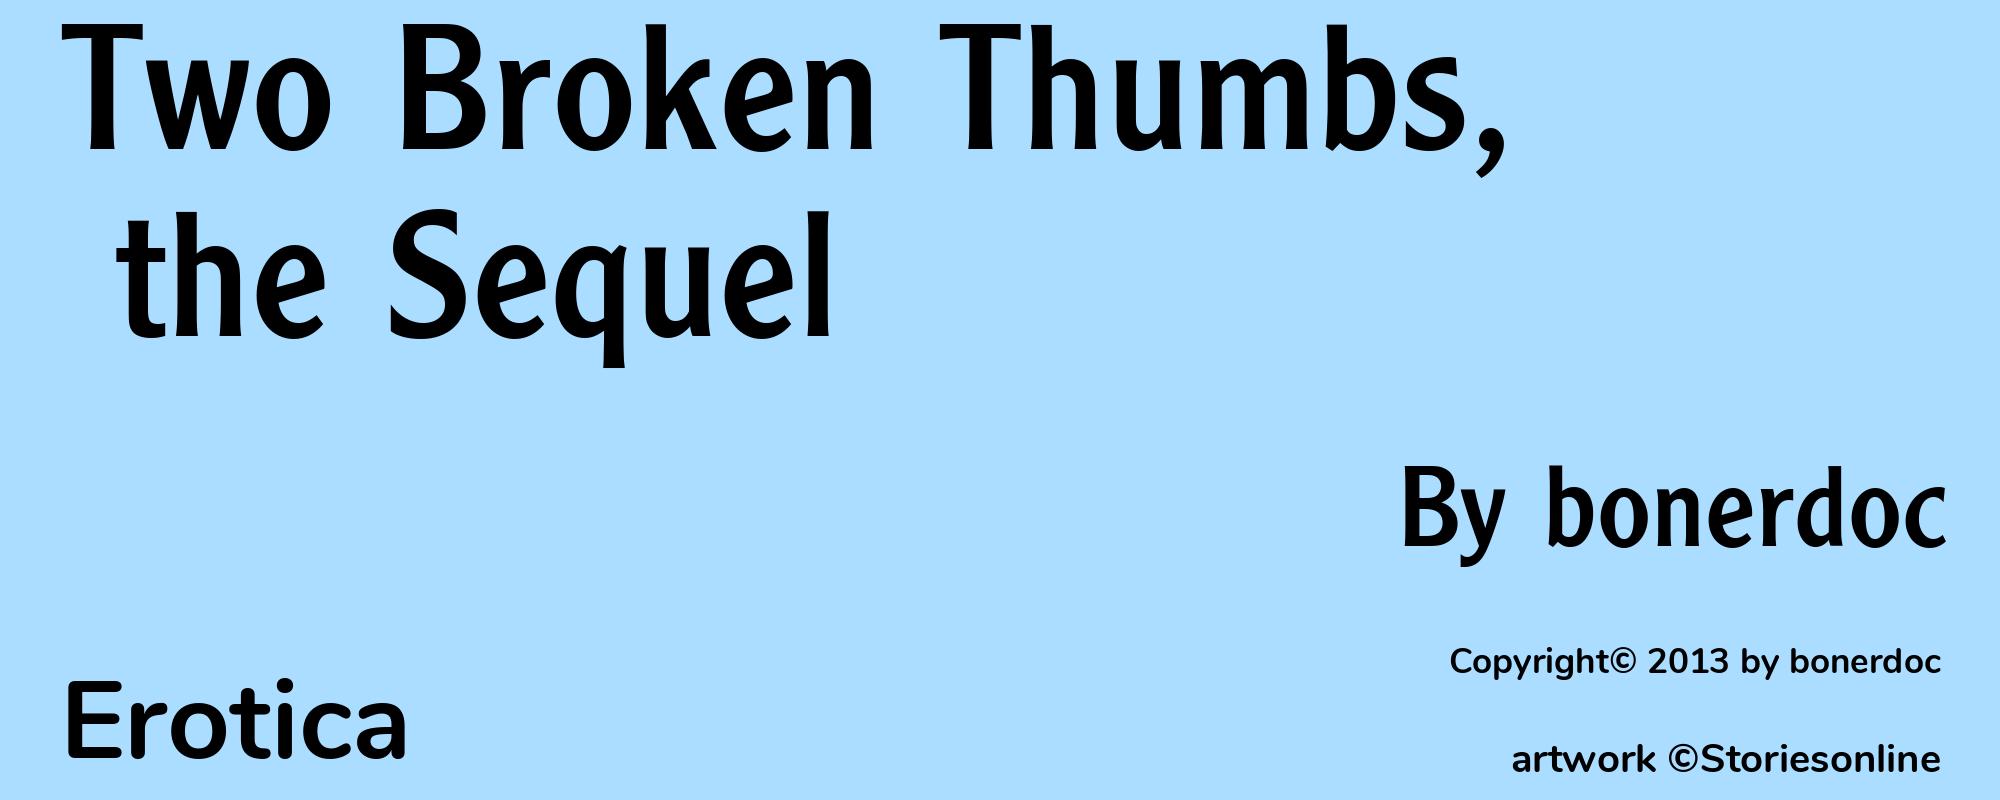 Two Broken Thumbs, the Sequel - Cover